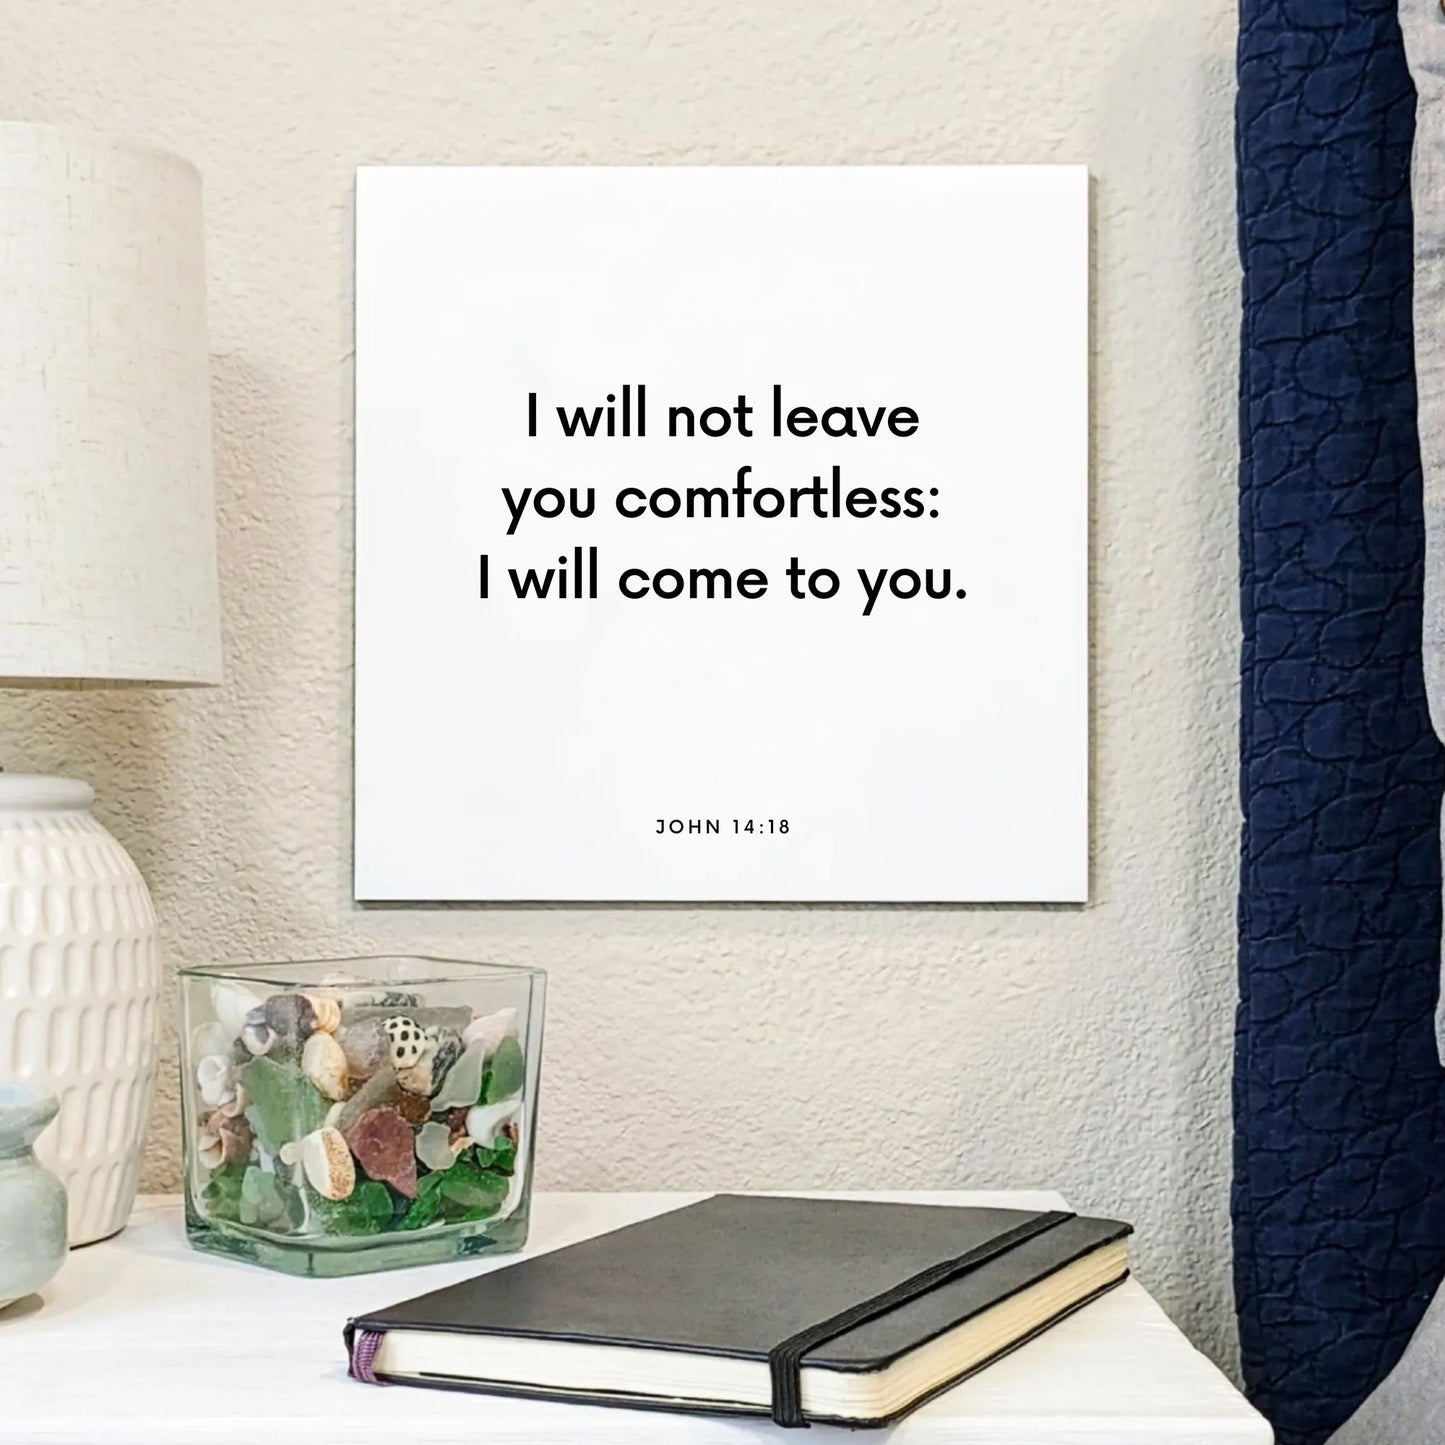 Bedside mouting of the scripture tile for John 14:18 - "I will not leave you comfortless: I will come to you"